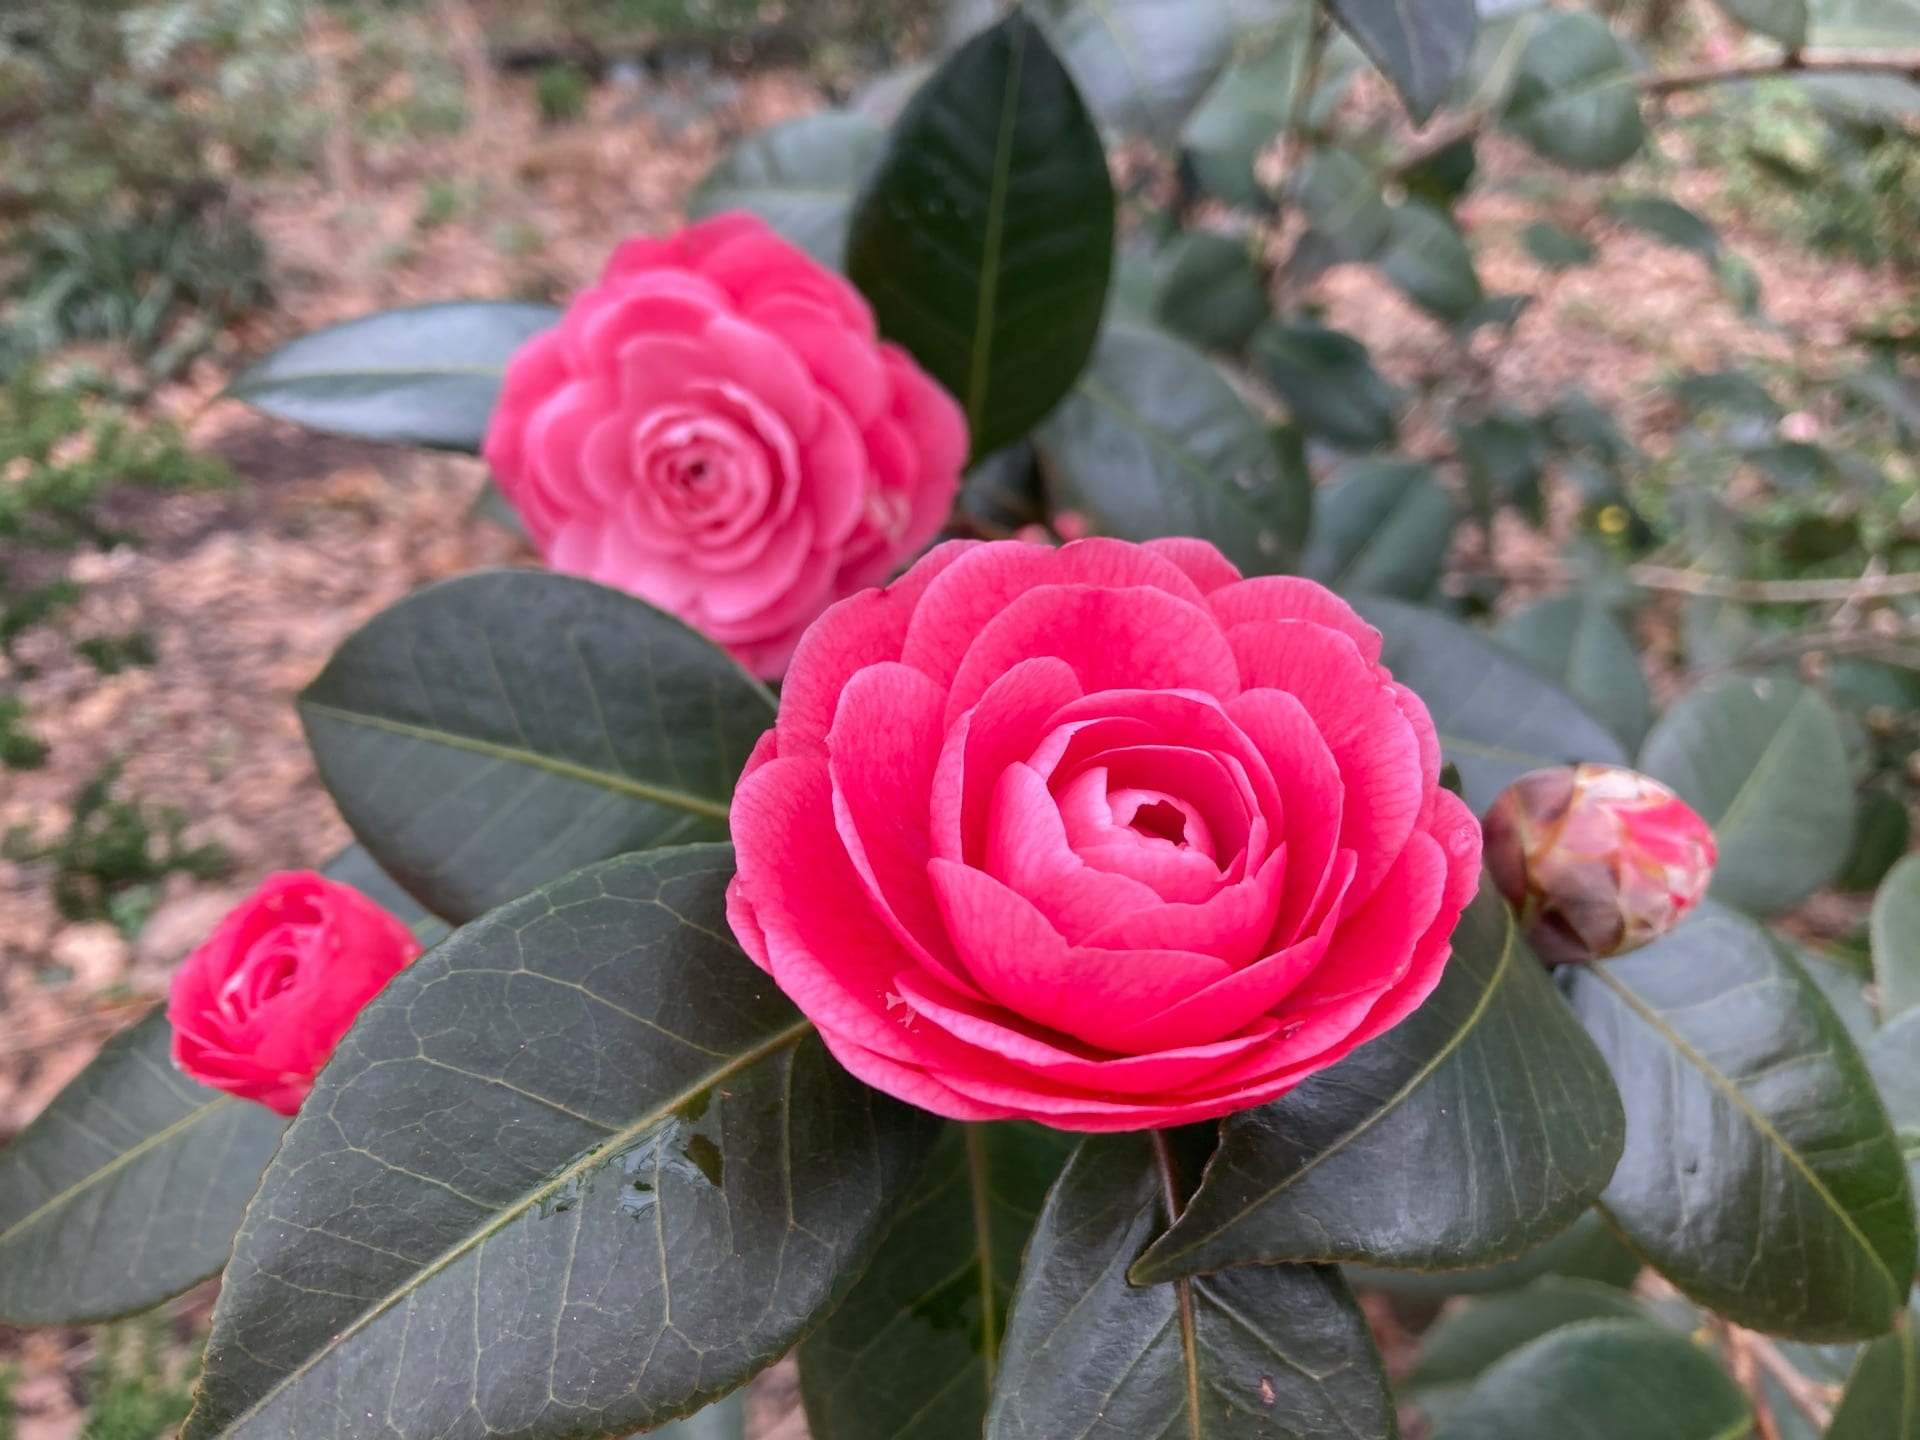 The flowers of Camellia japonica 'April Kiss' steal the show.